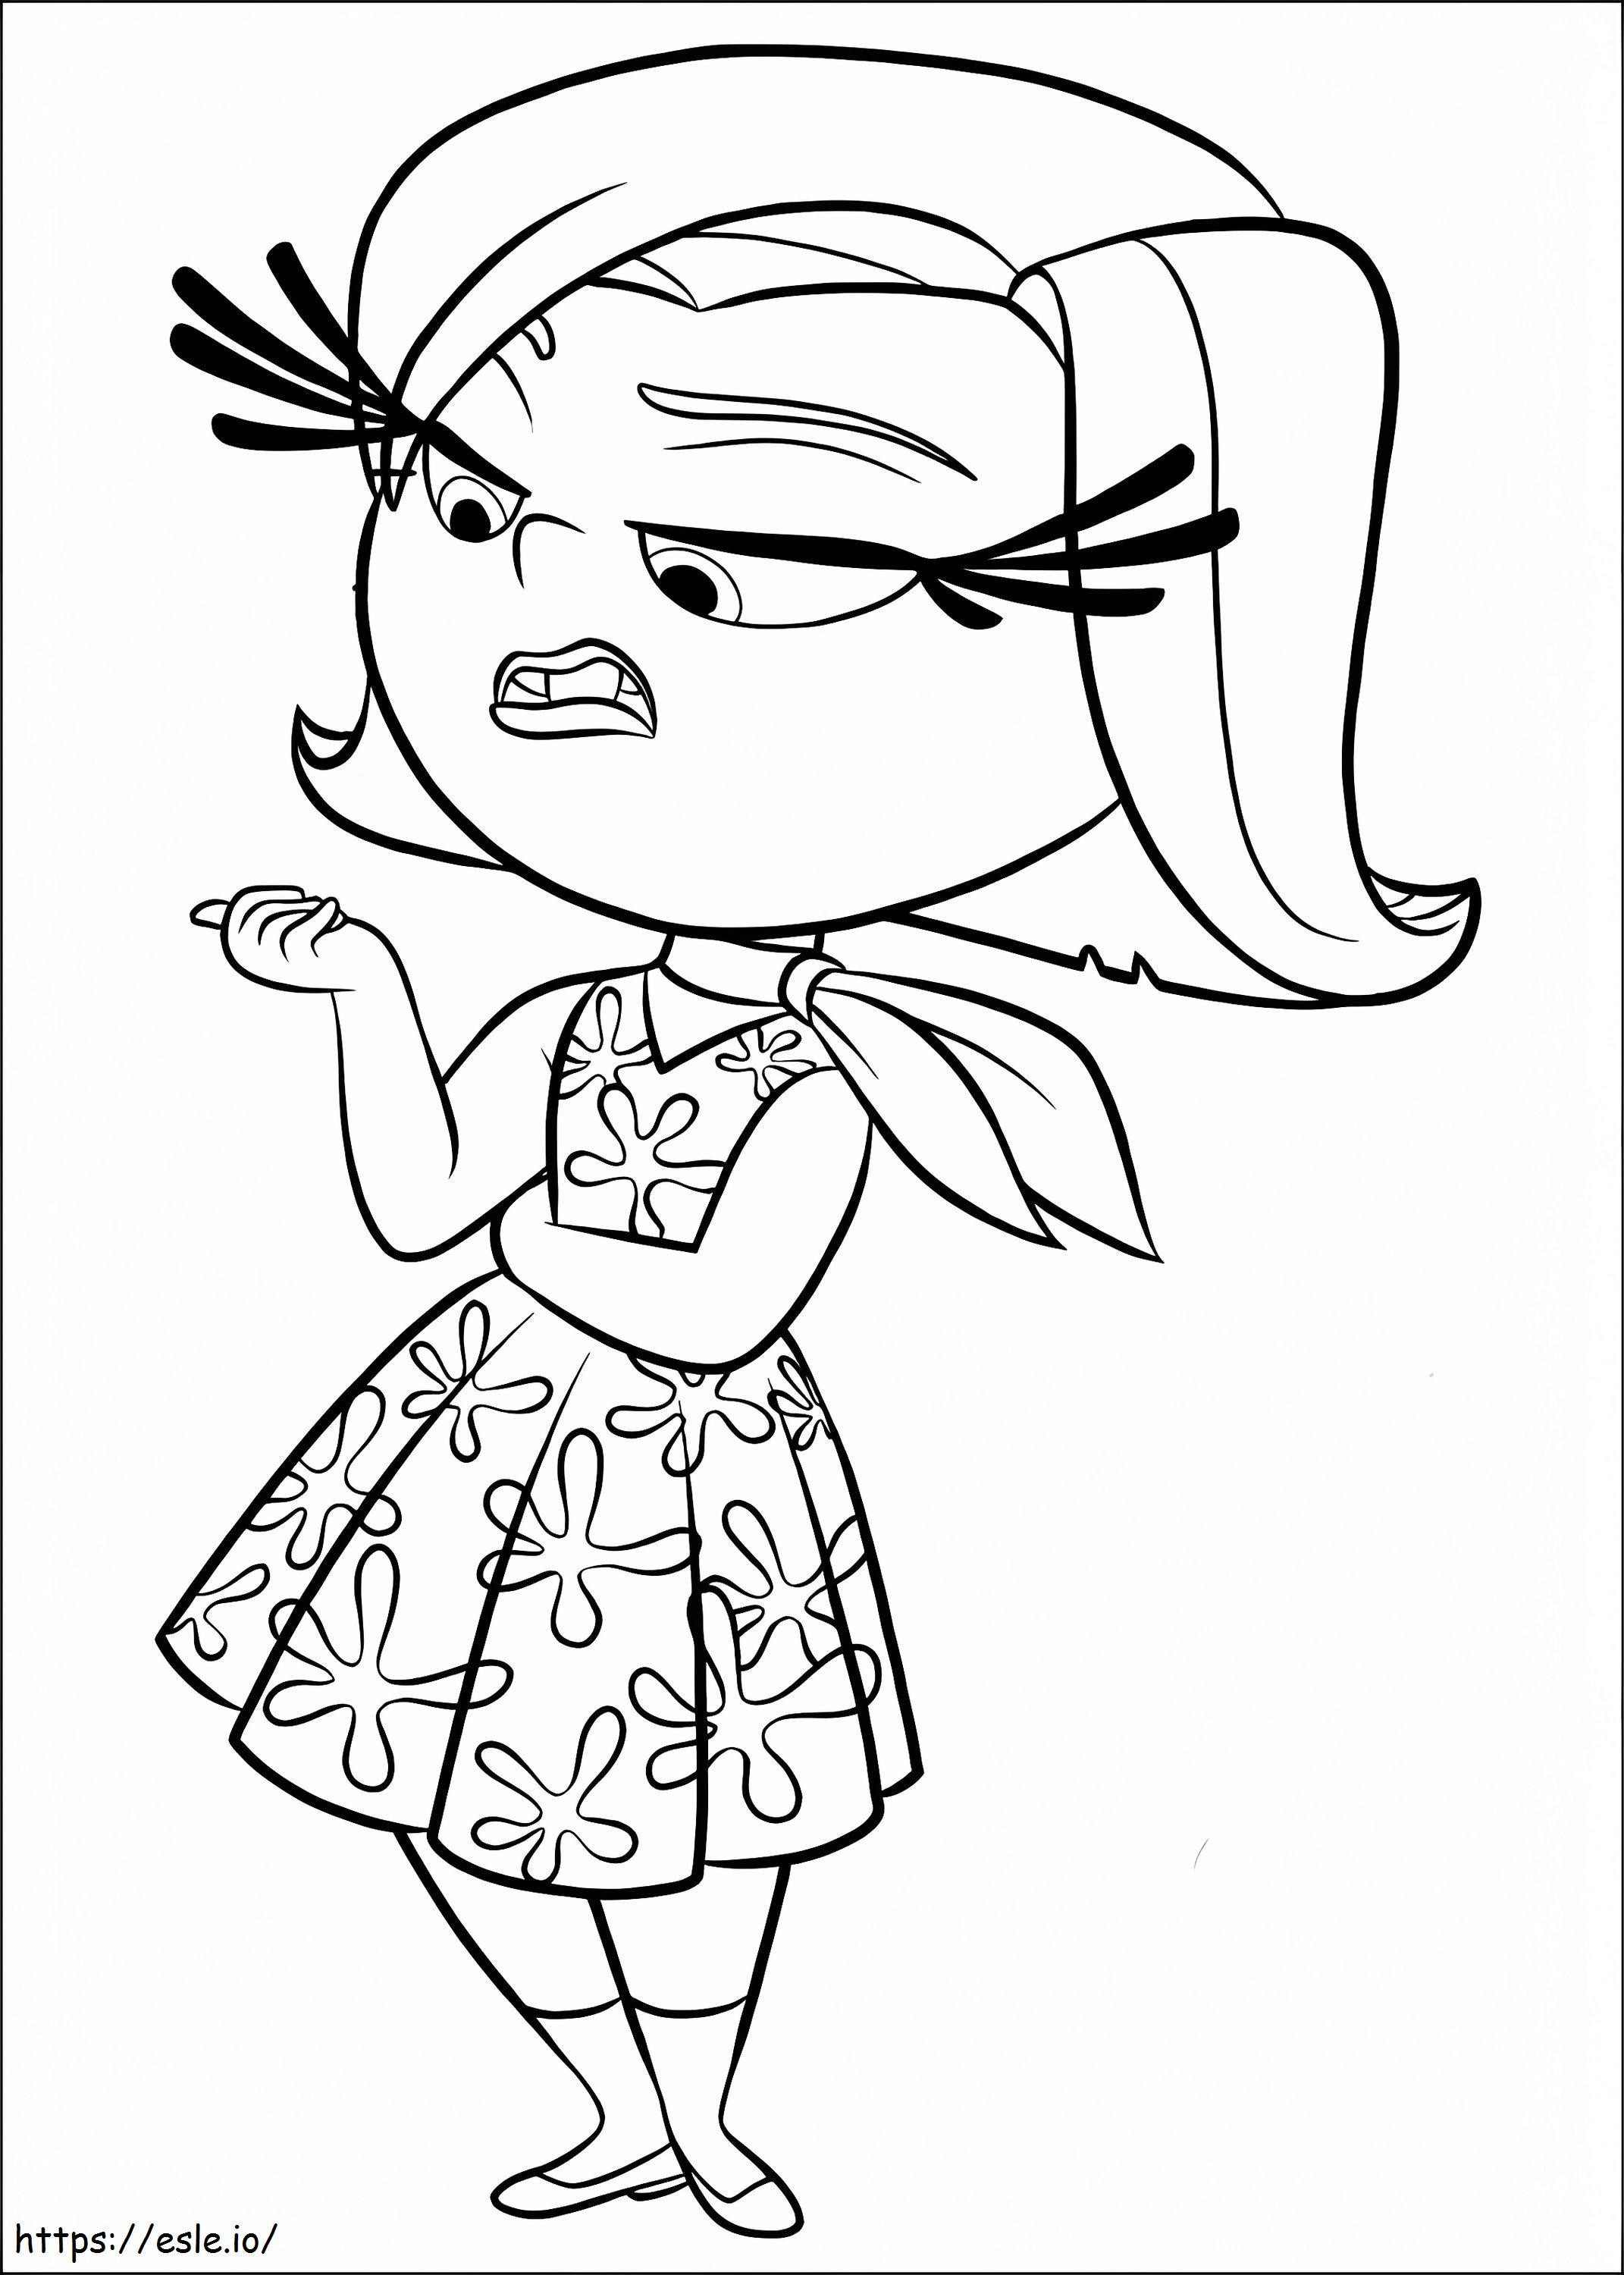 Disgust Inside Out 1 coloring page